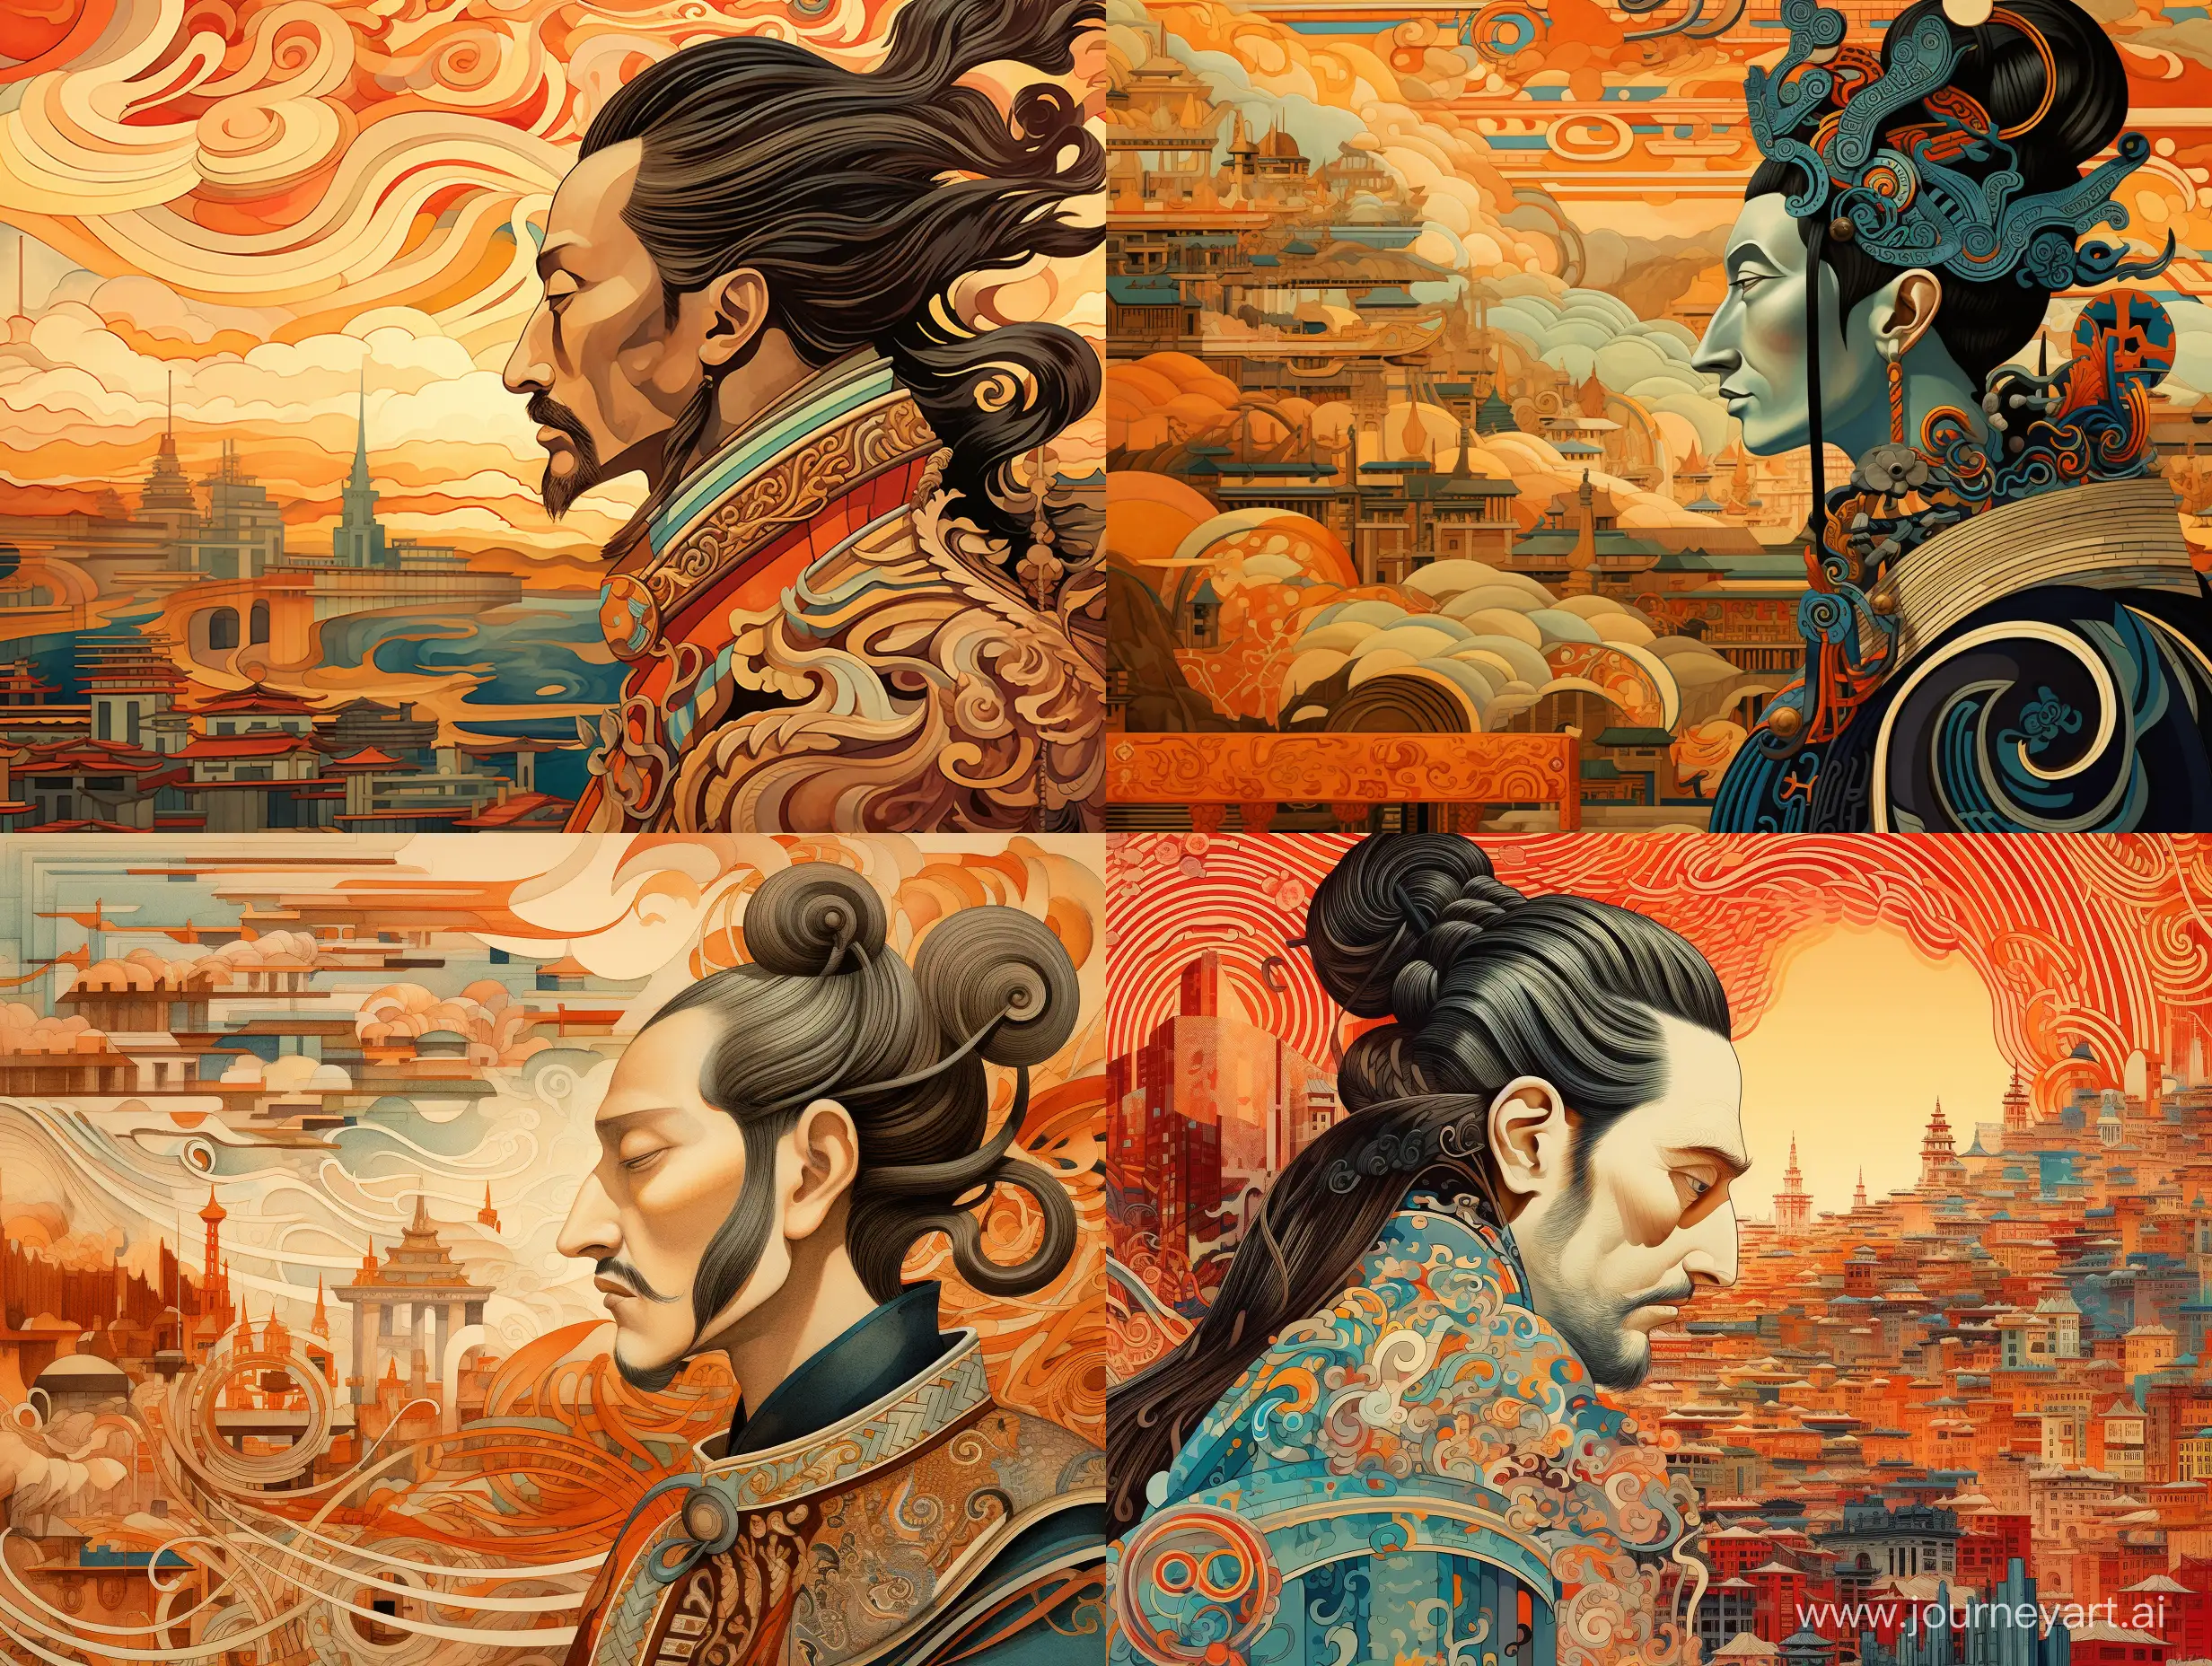 Qin Shi Huangdi, First Emperor of China, in profile, central portrait, ancient civilization, against the background of the pattern of the ancient city of Luoyang, fabulous illustration, stylized caricature, Victo Ngai, watercolor, decorative, flat drawing.